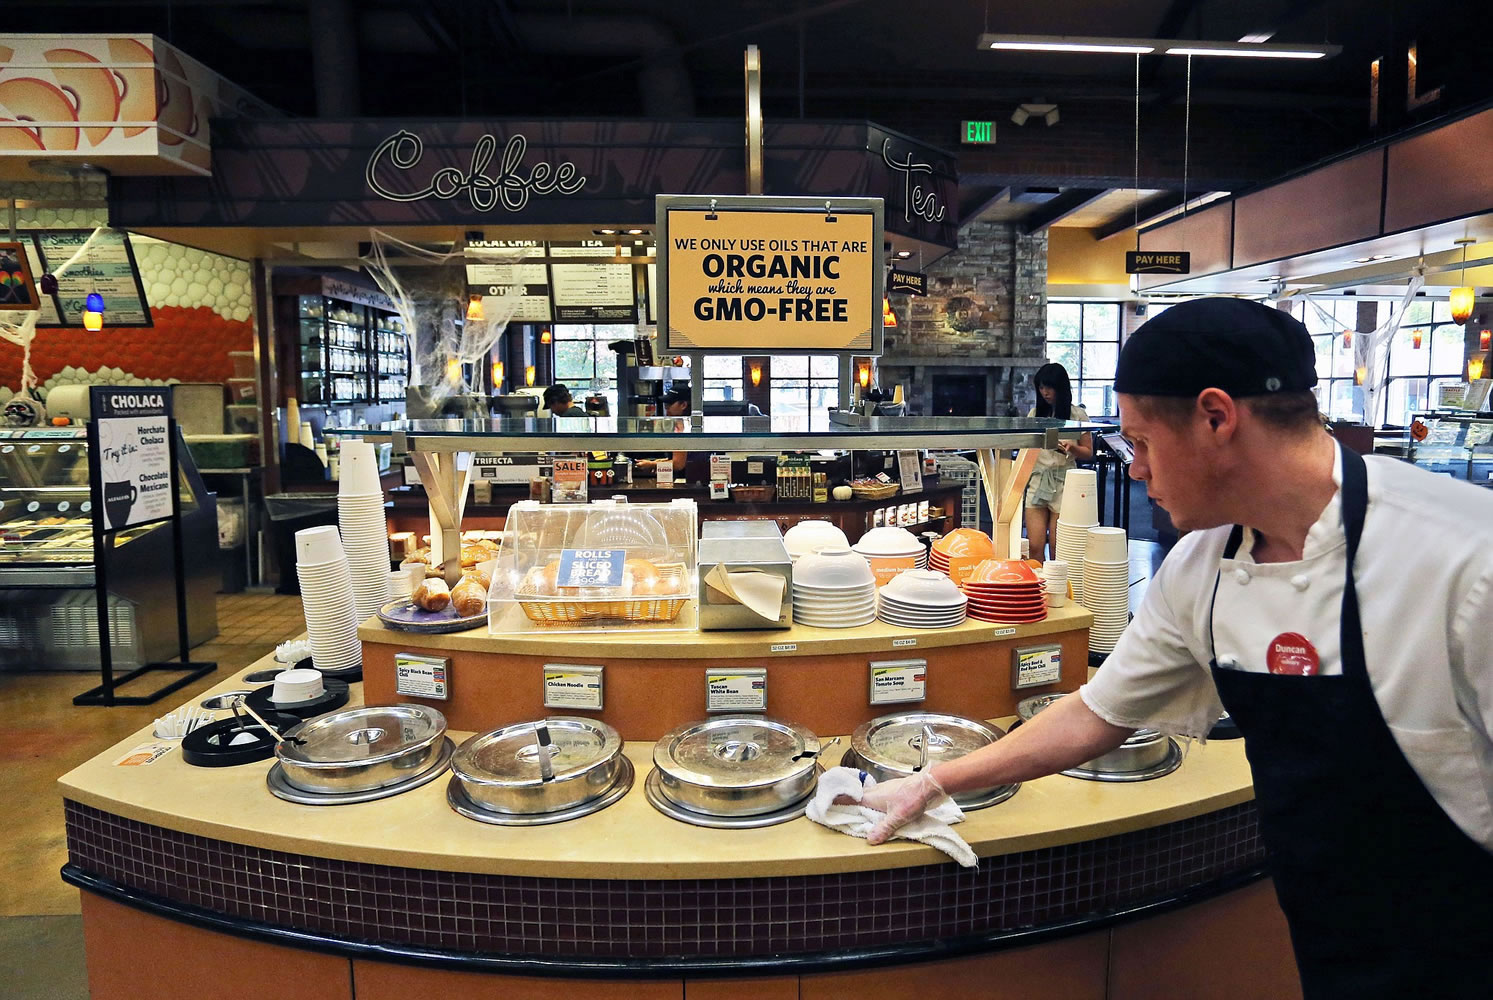 A grocery store employee wipes down a soup bar with a display informing customers of organic, GMO-free oils in Boulder, Colo.